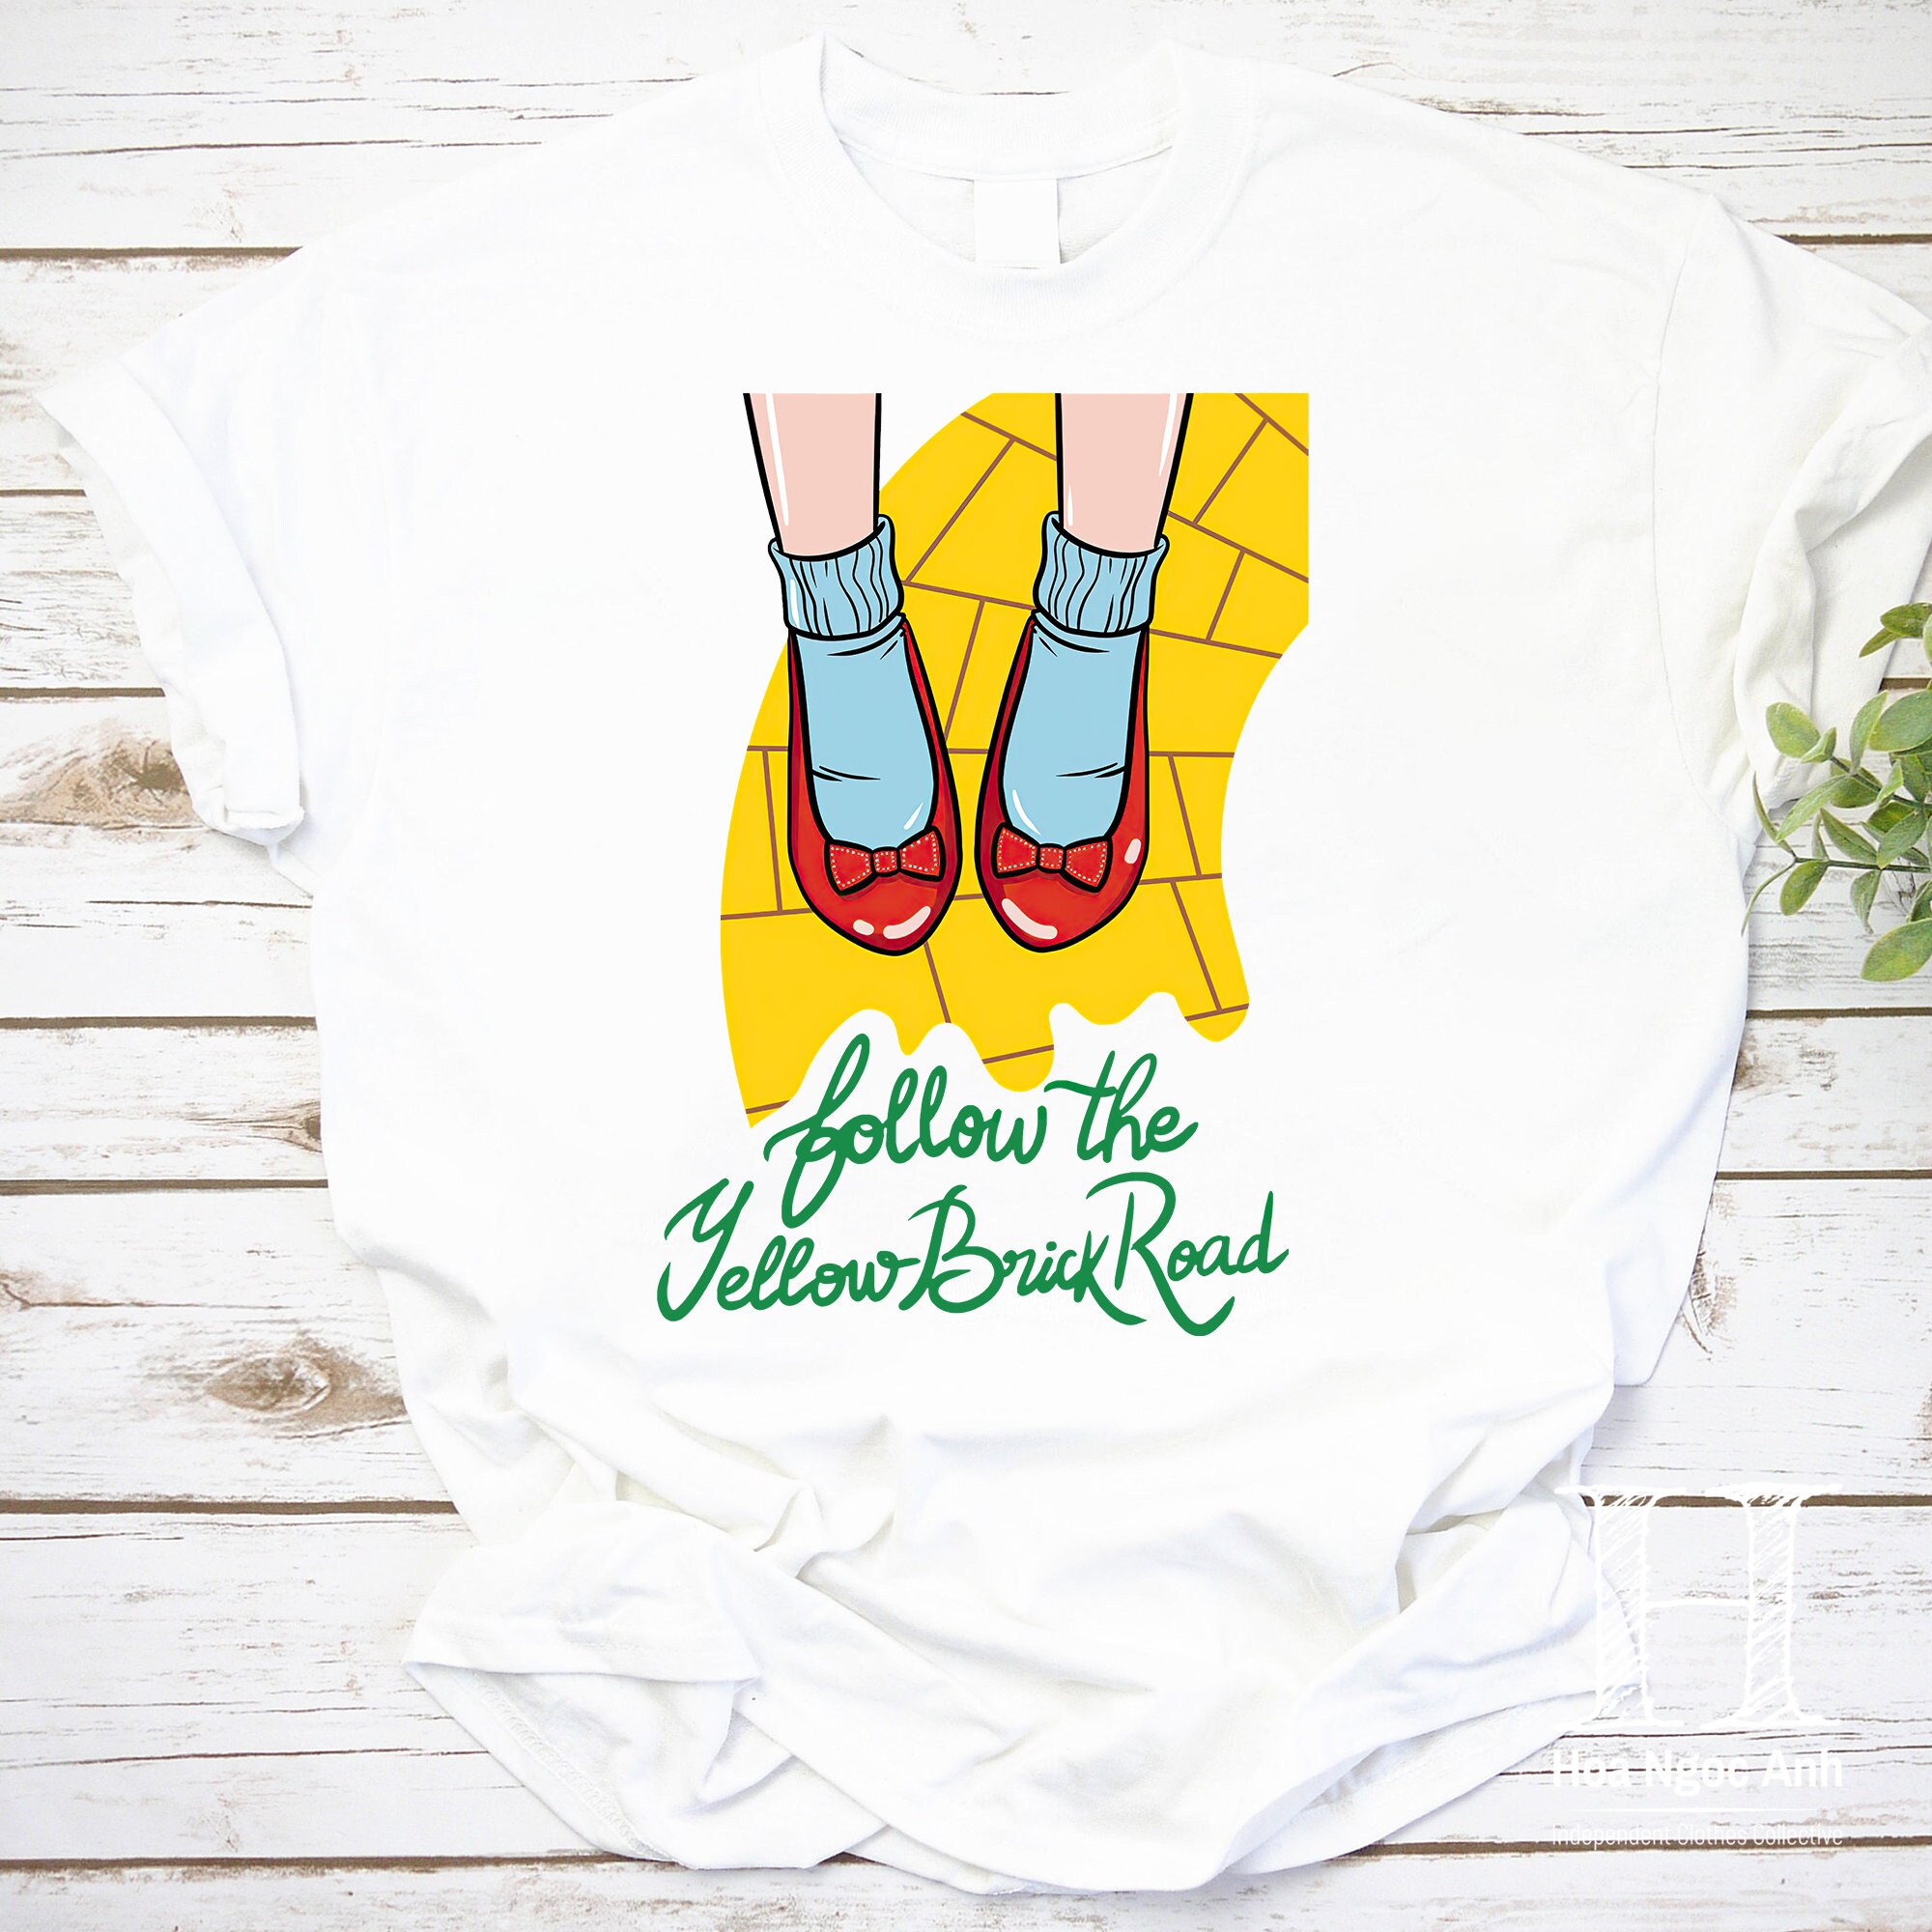 Dorothy Yellow Brick Road The Wizard of Oz Vintage T-Shirt